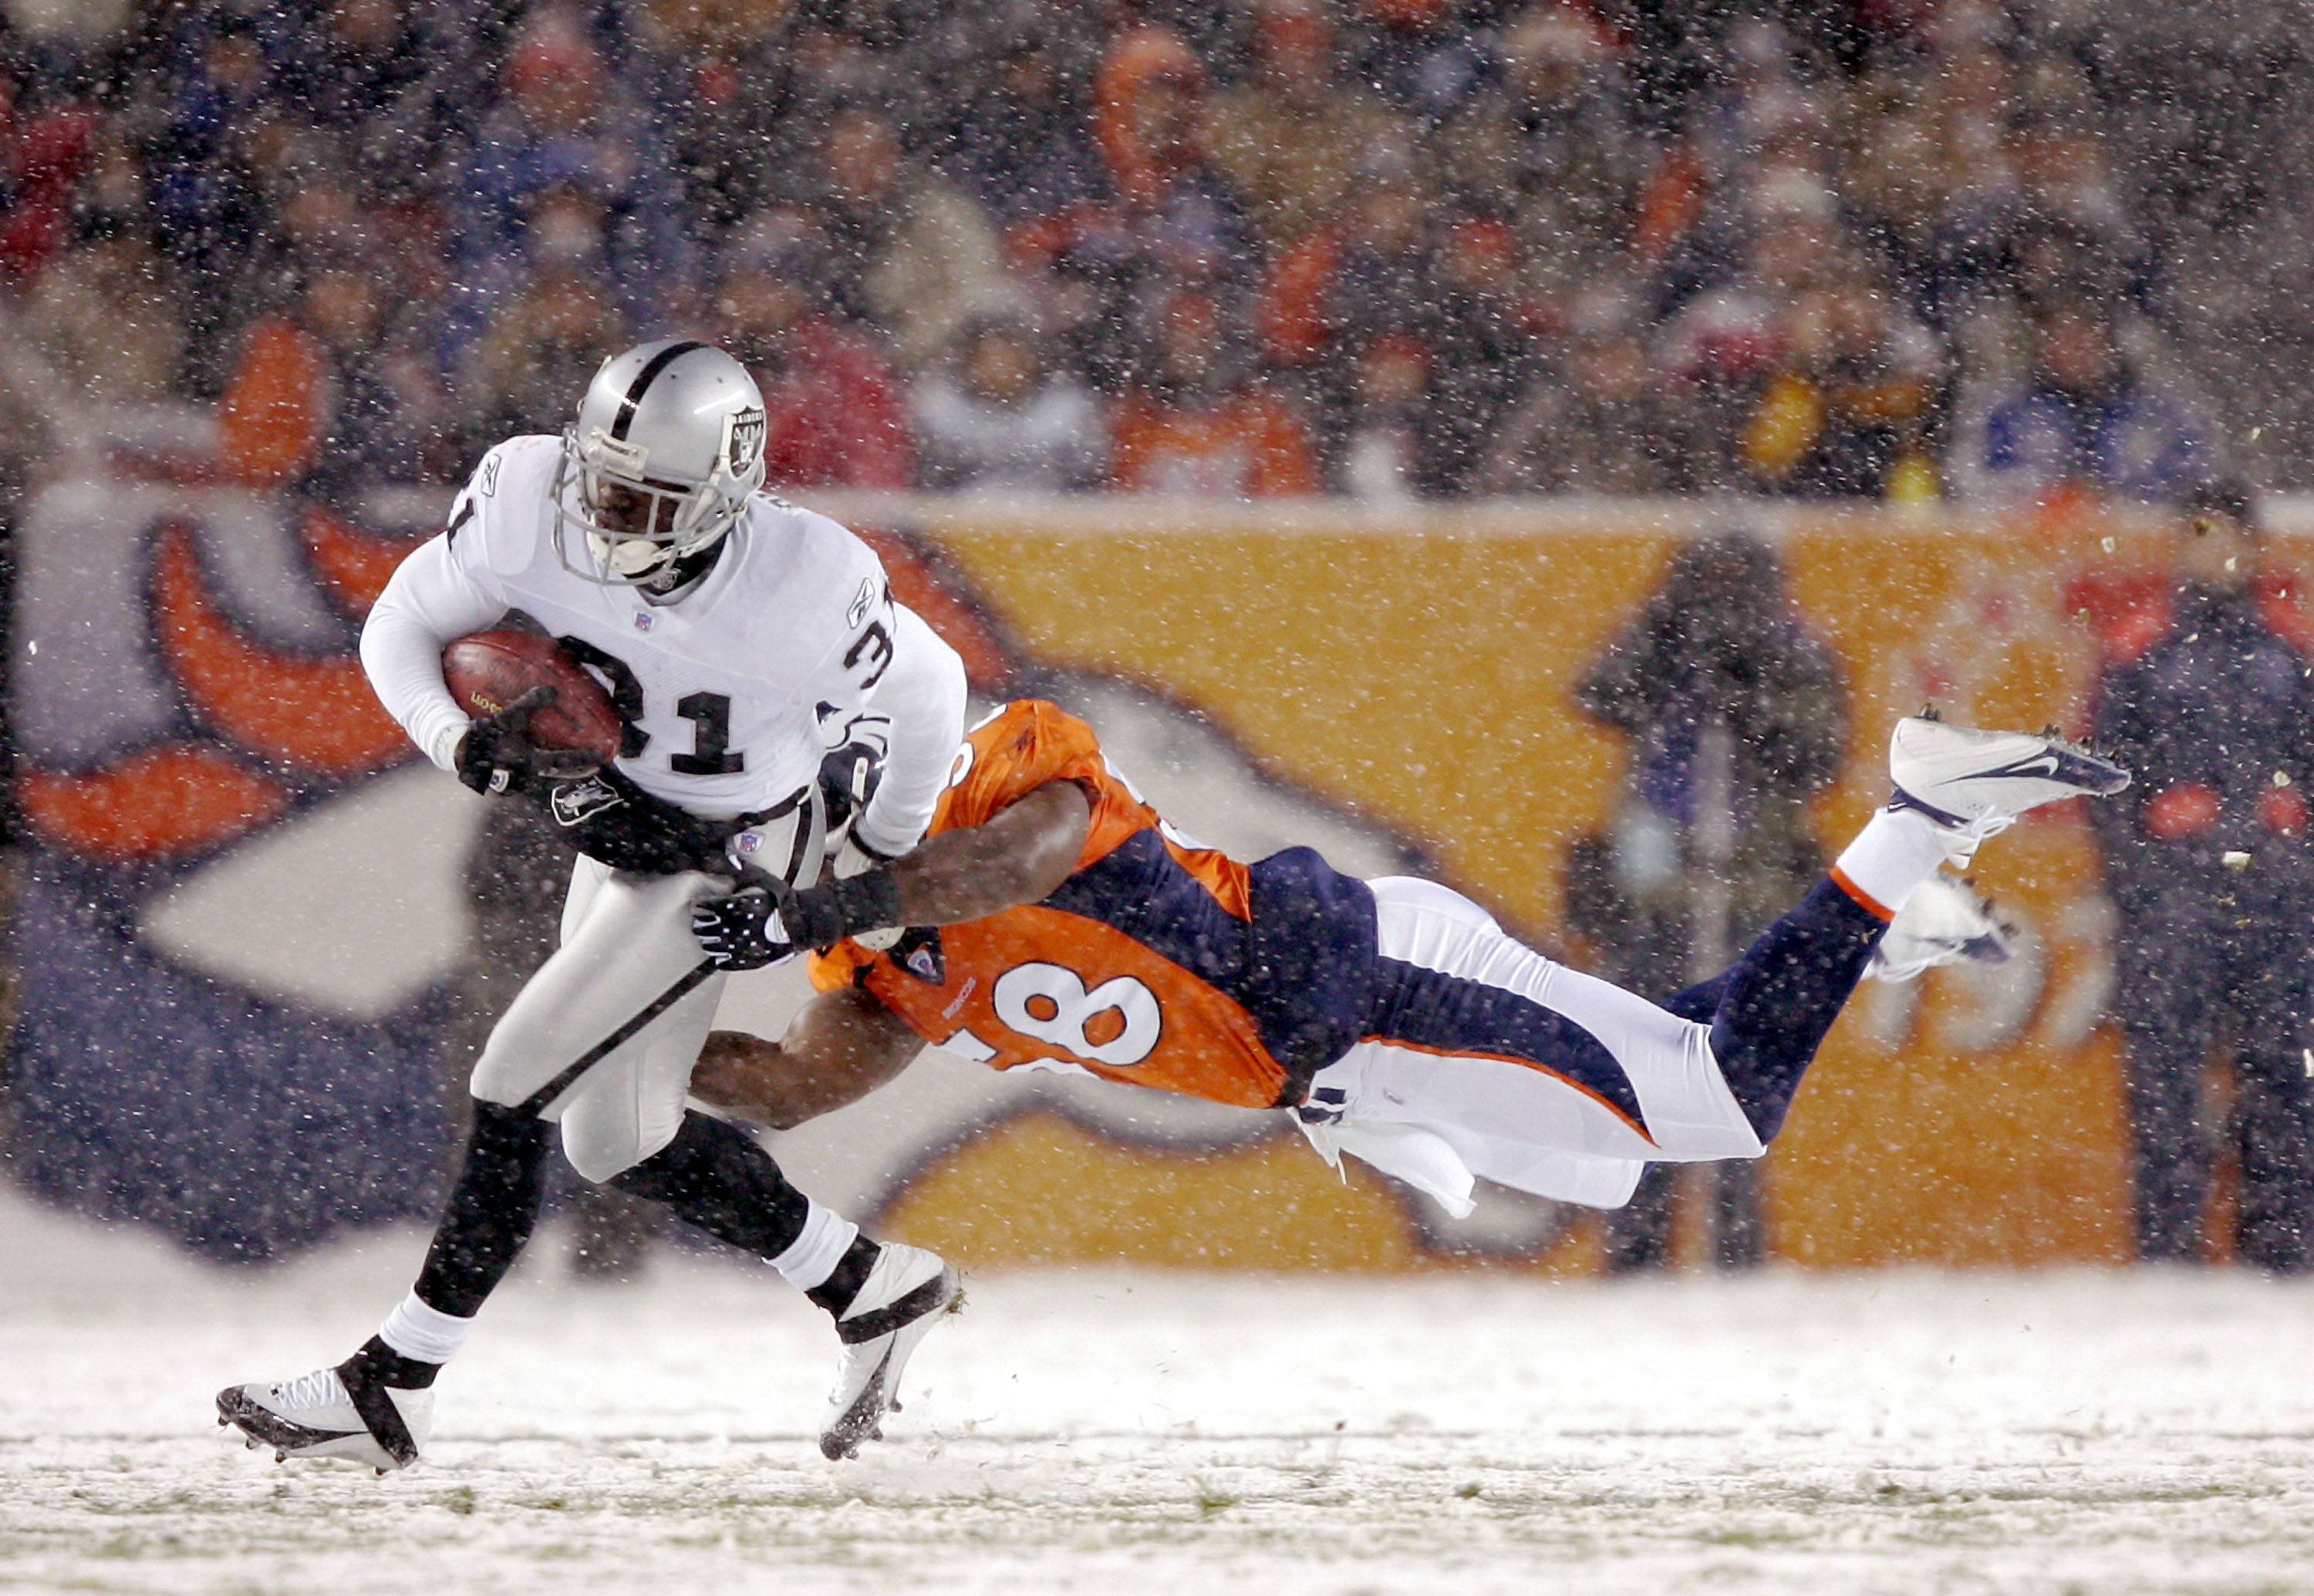 DENVER - NOVEMBER 28:  Linebacker Terry Pierce #58 of the Denver Broncos dives in an attempt to tackle punt returner Phillip Buchanon #31 of the Oakland Raiders on November 28, 2004 at Invesco Field at Mile High Stadium in Denver, Colorado. The Raiders wo